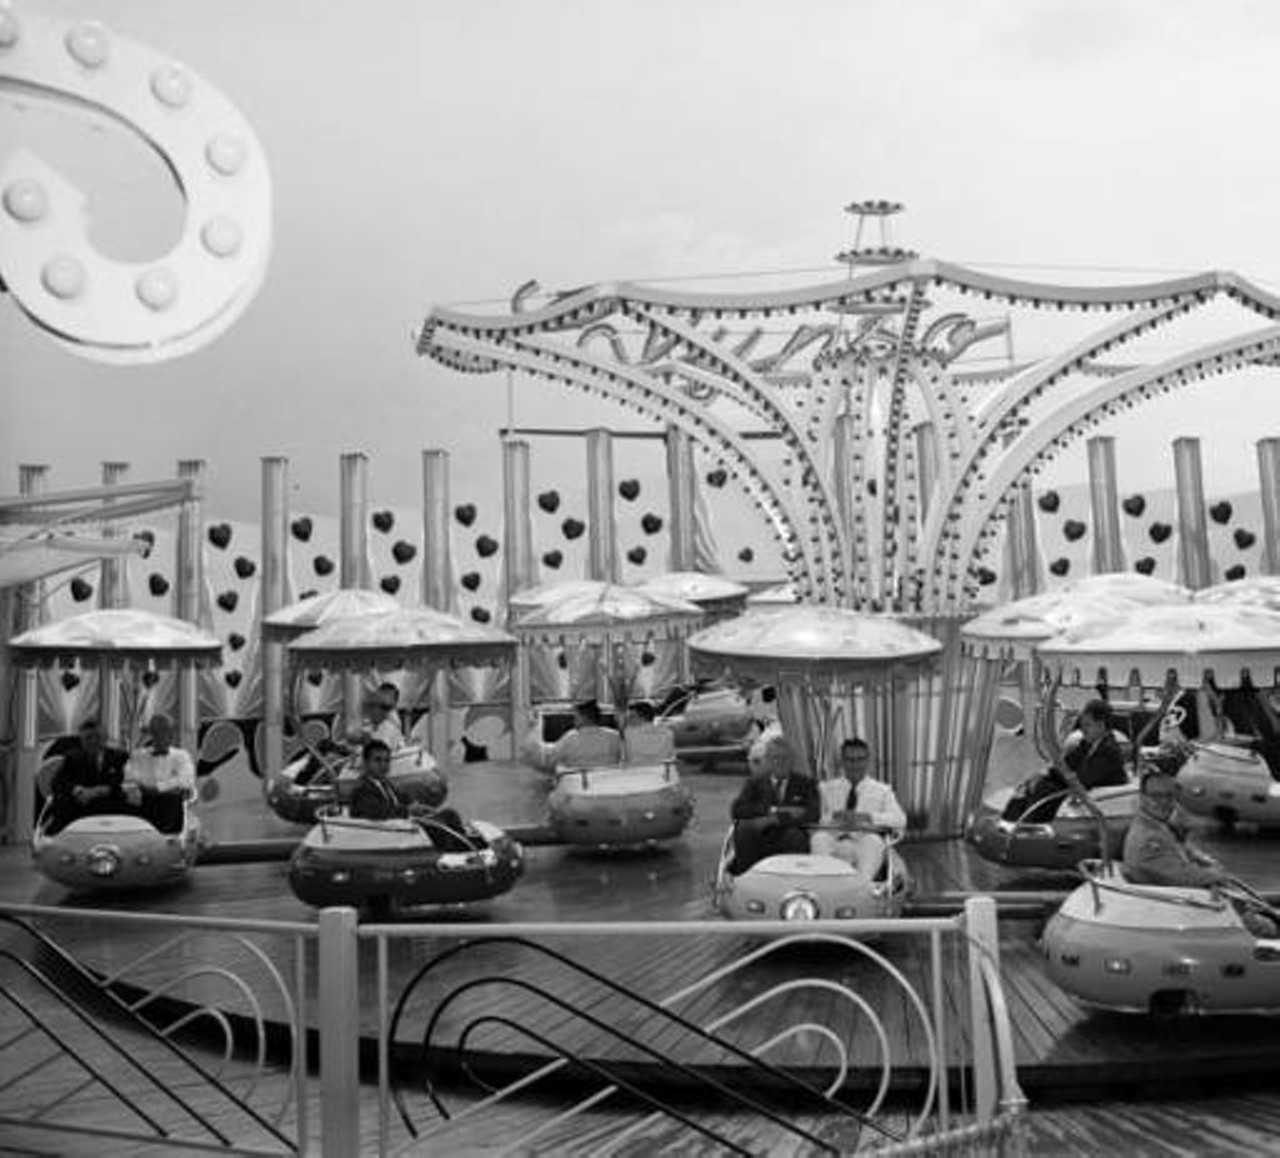 Businessmen on Carnival Ride, circa 1962
How safe could a carnival ride be in the 60s? According to OSHA, even today’s rides are probably not as safe as you would want them to be, but just look at this photo!
Photo via Zintgraff Studio Photo Collection